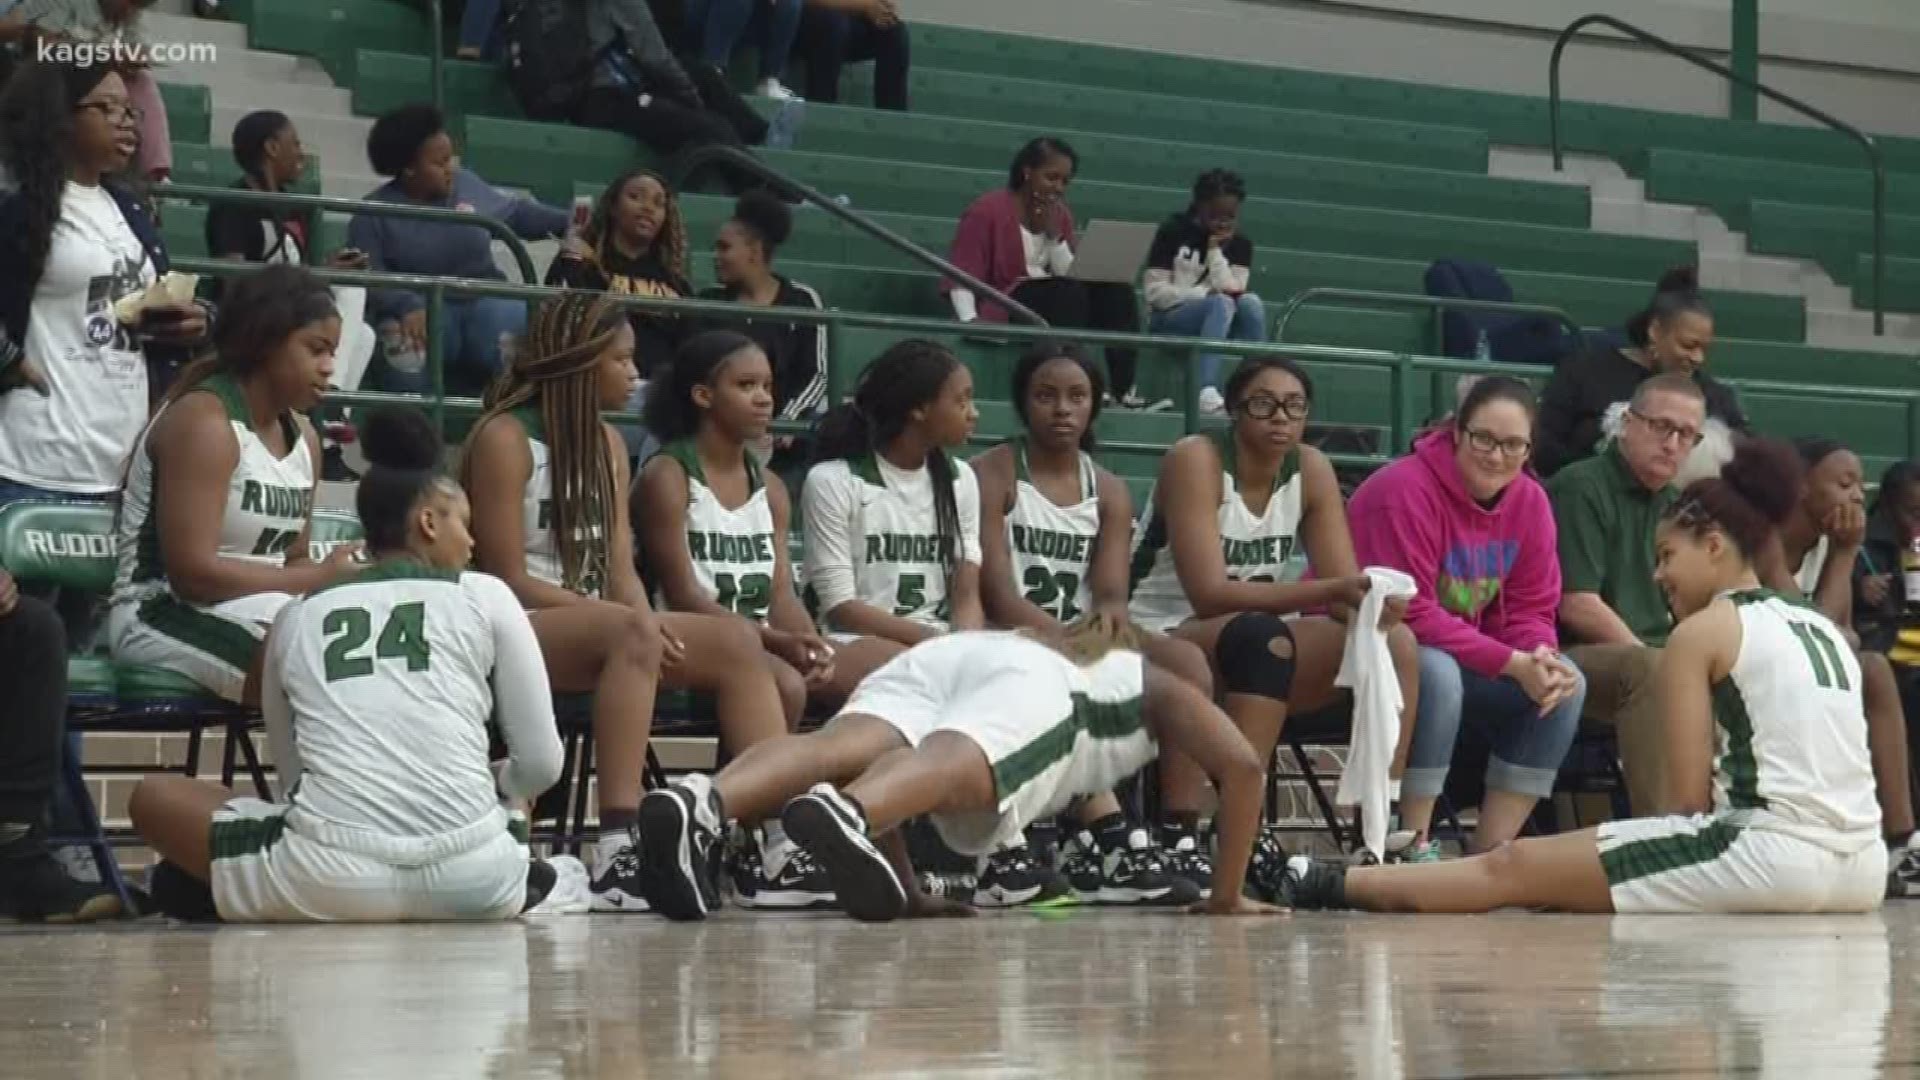 In girls high school basketball on Friday afternoon, Rudder takes down Katy Paetow while Snook defeated Navasota.